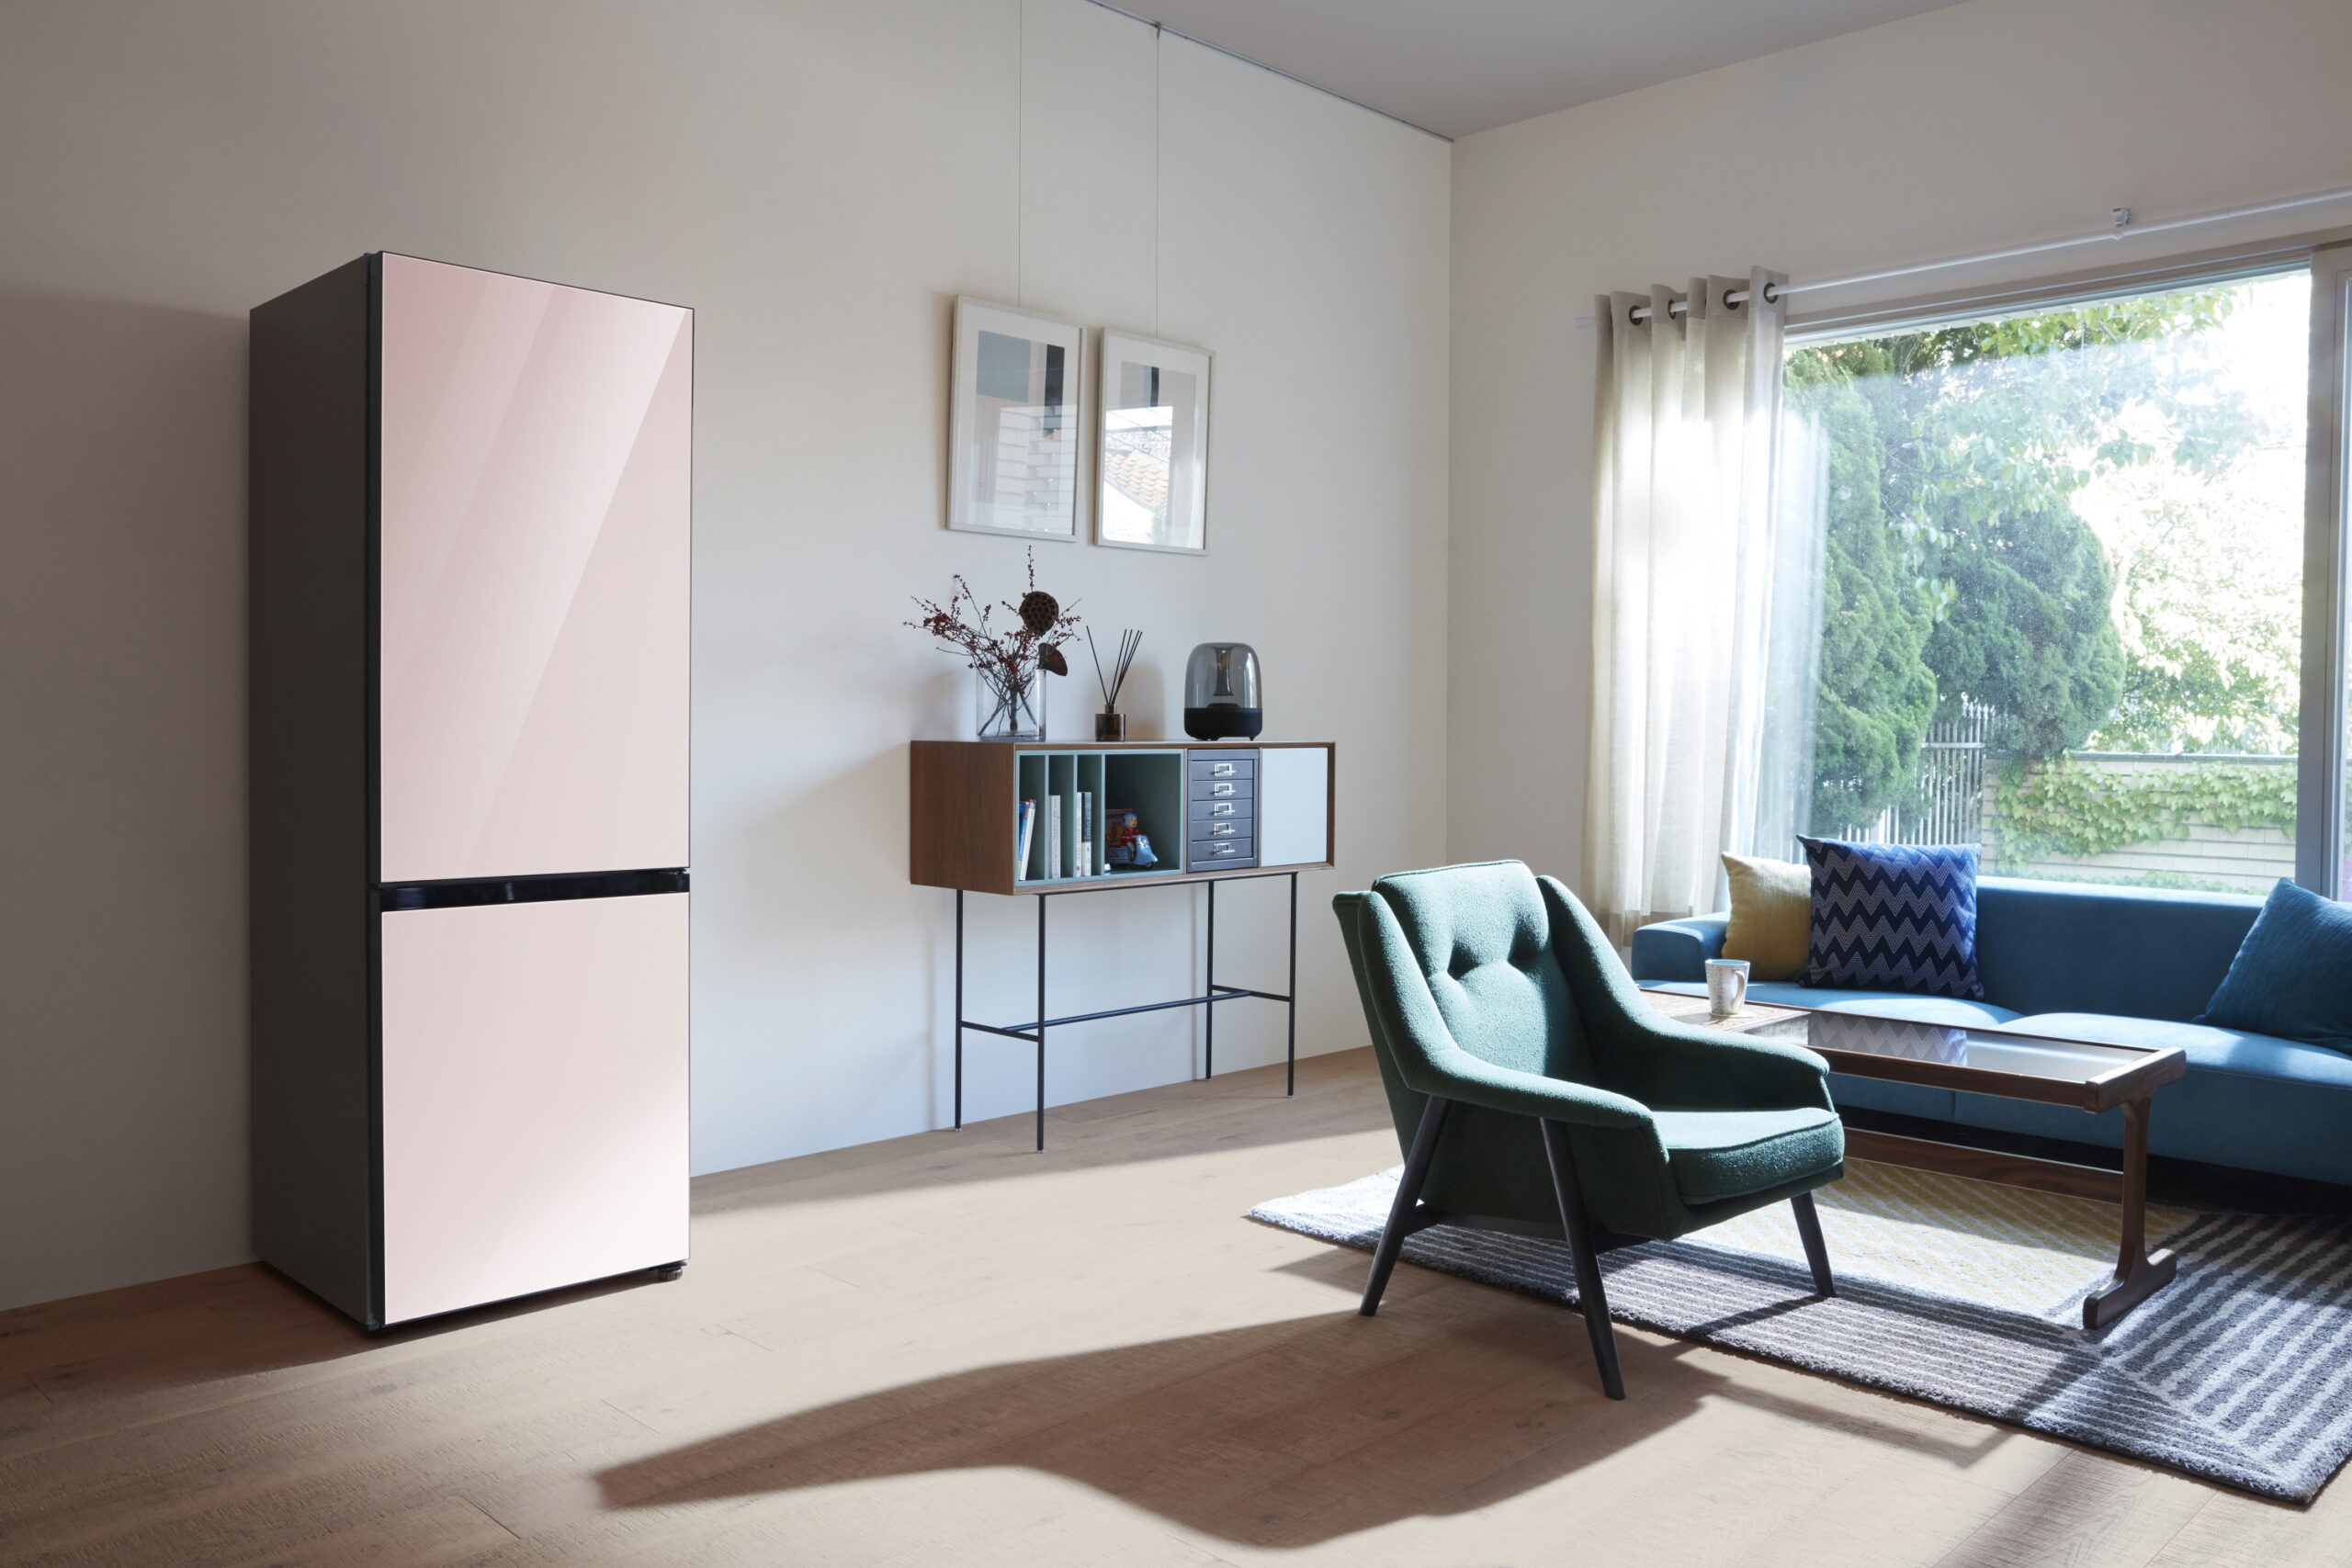 samsung-aims-to-release-more-customizable-home-appliances-in-the-future